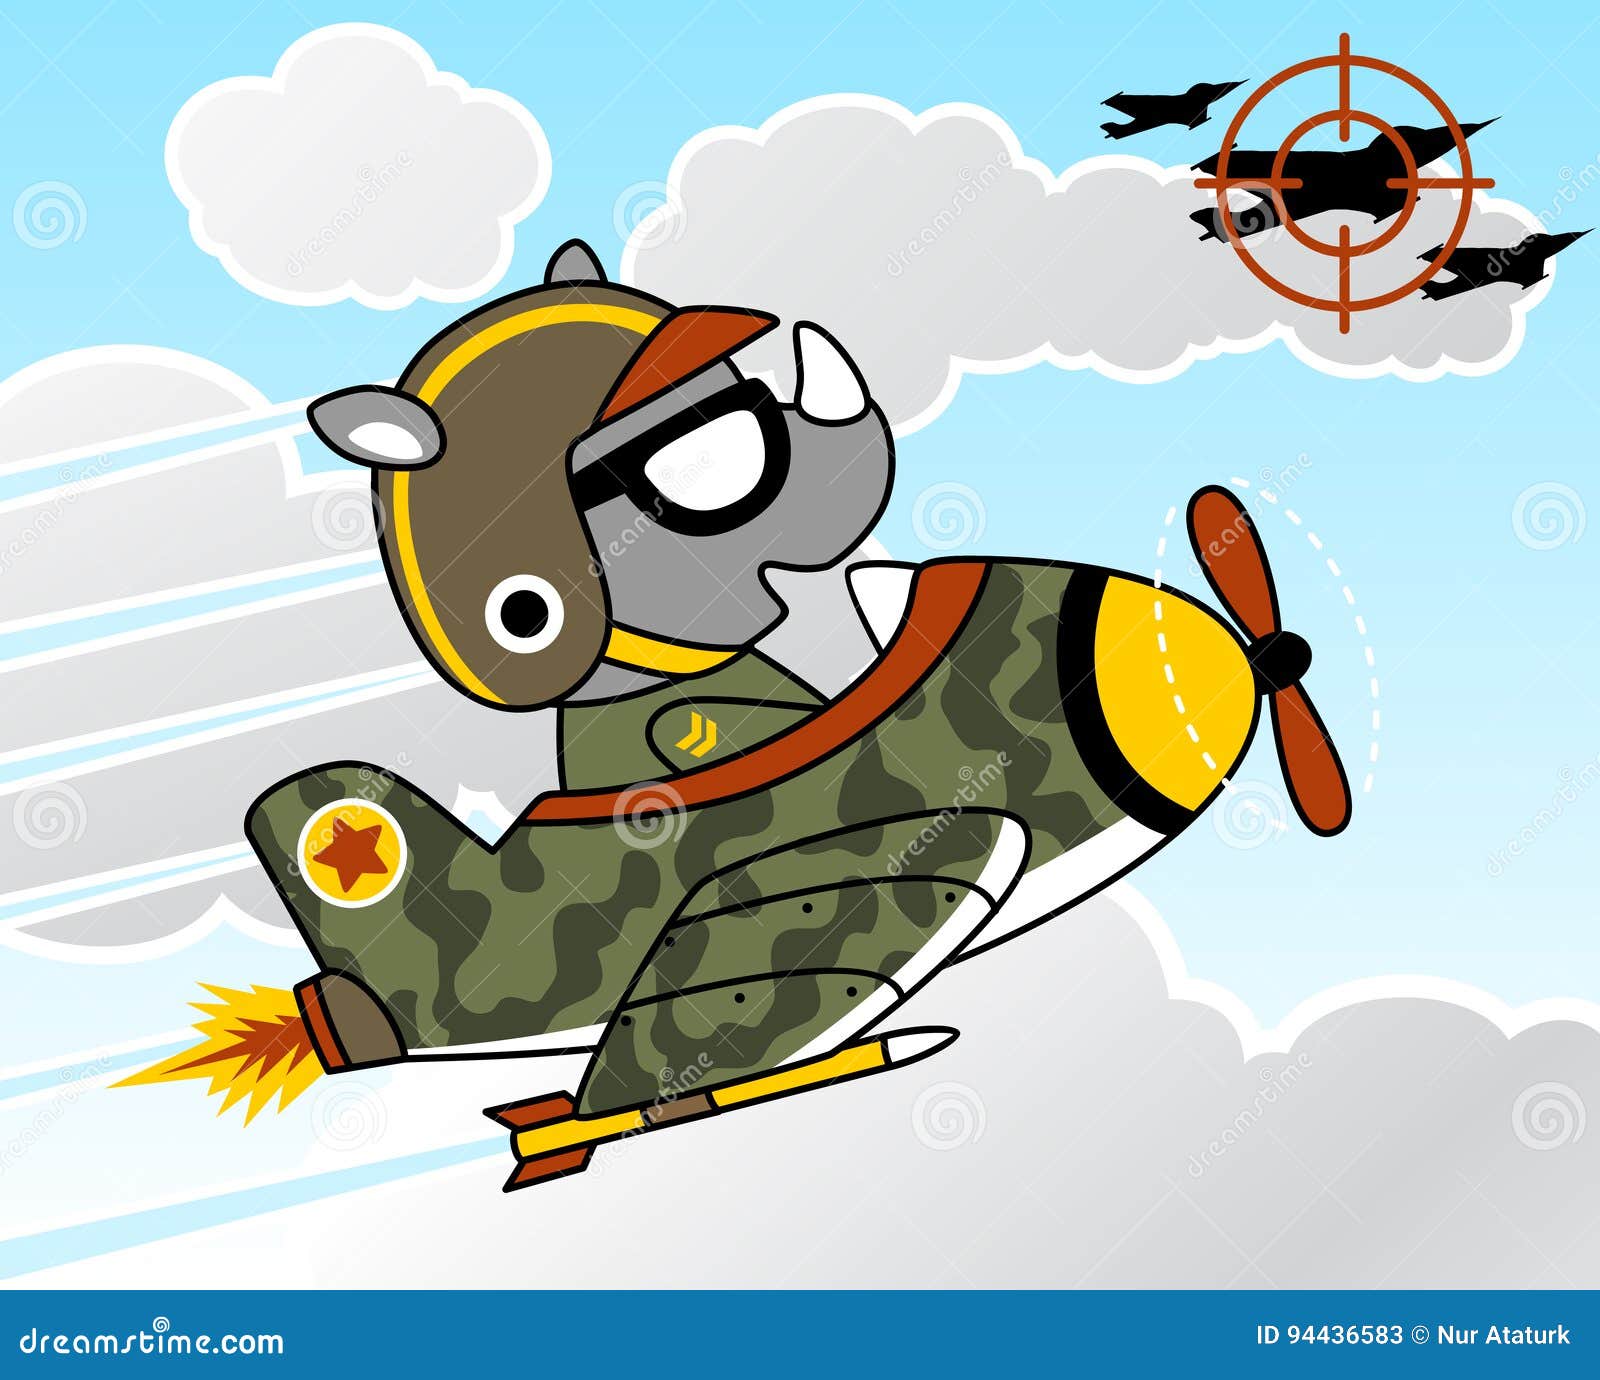 Air force stock vector. Illustration of attack, combat - 94436583